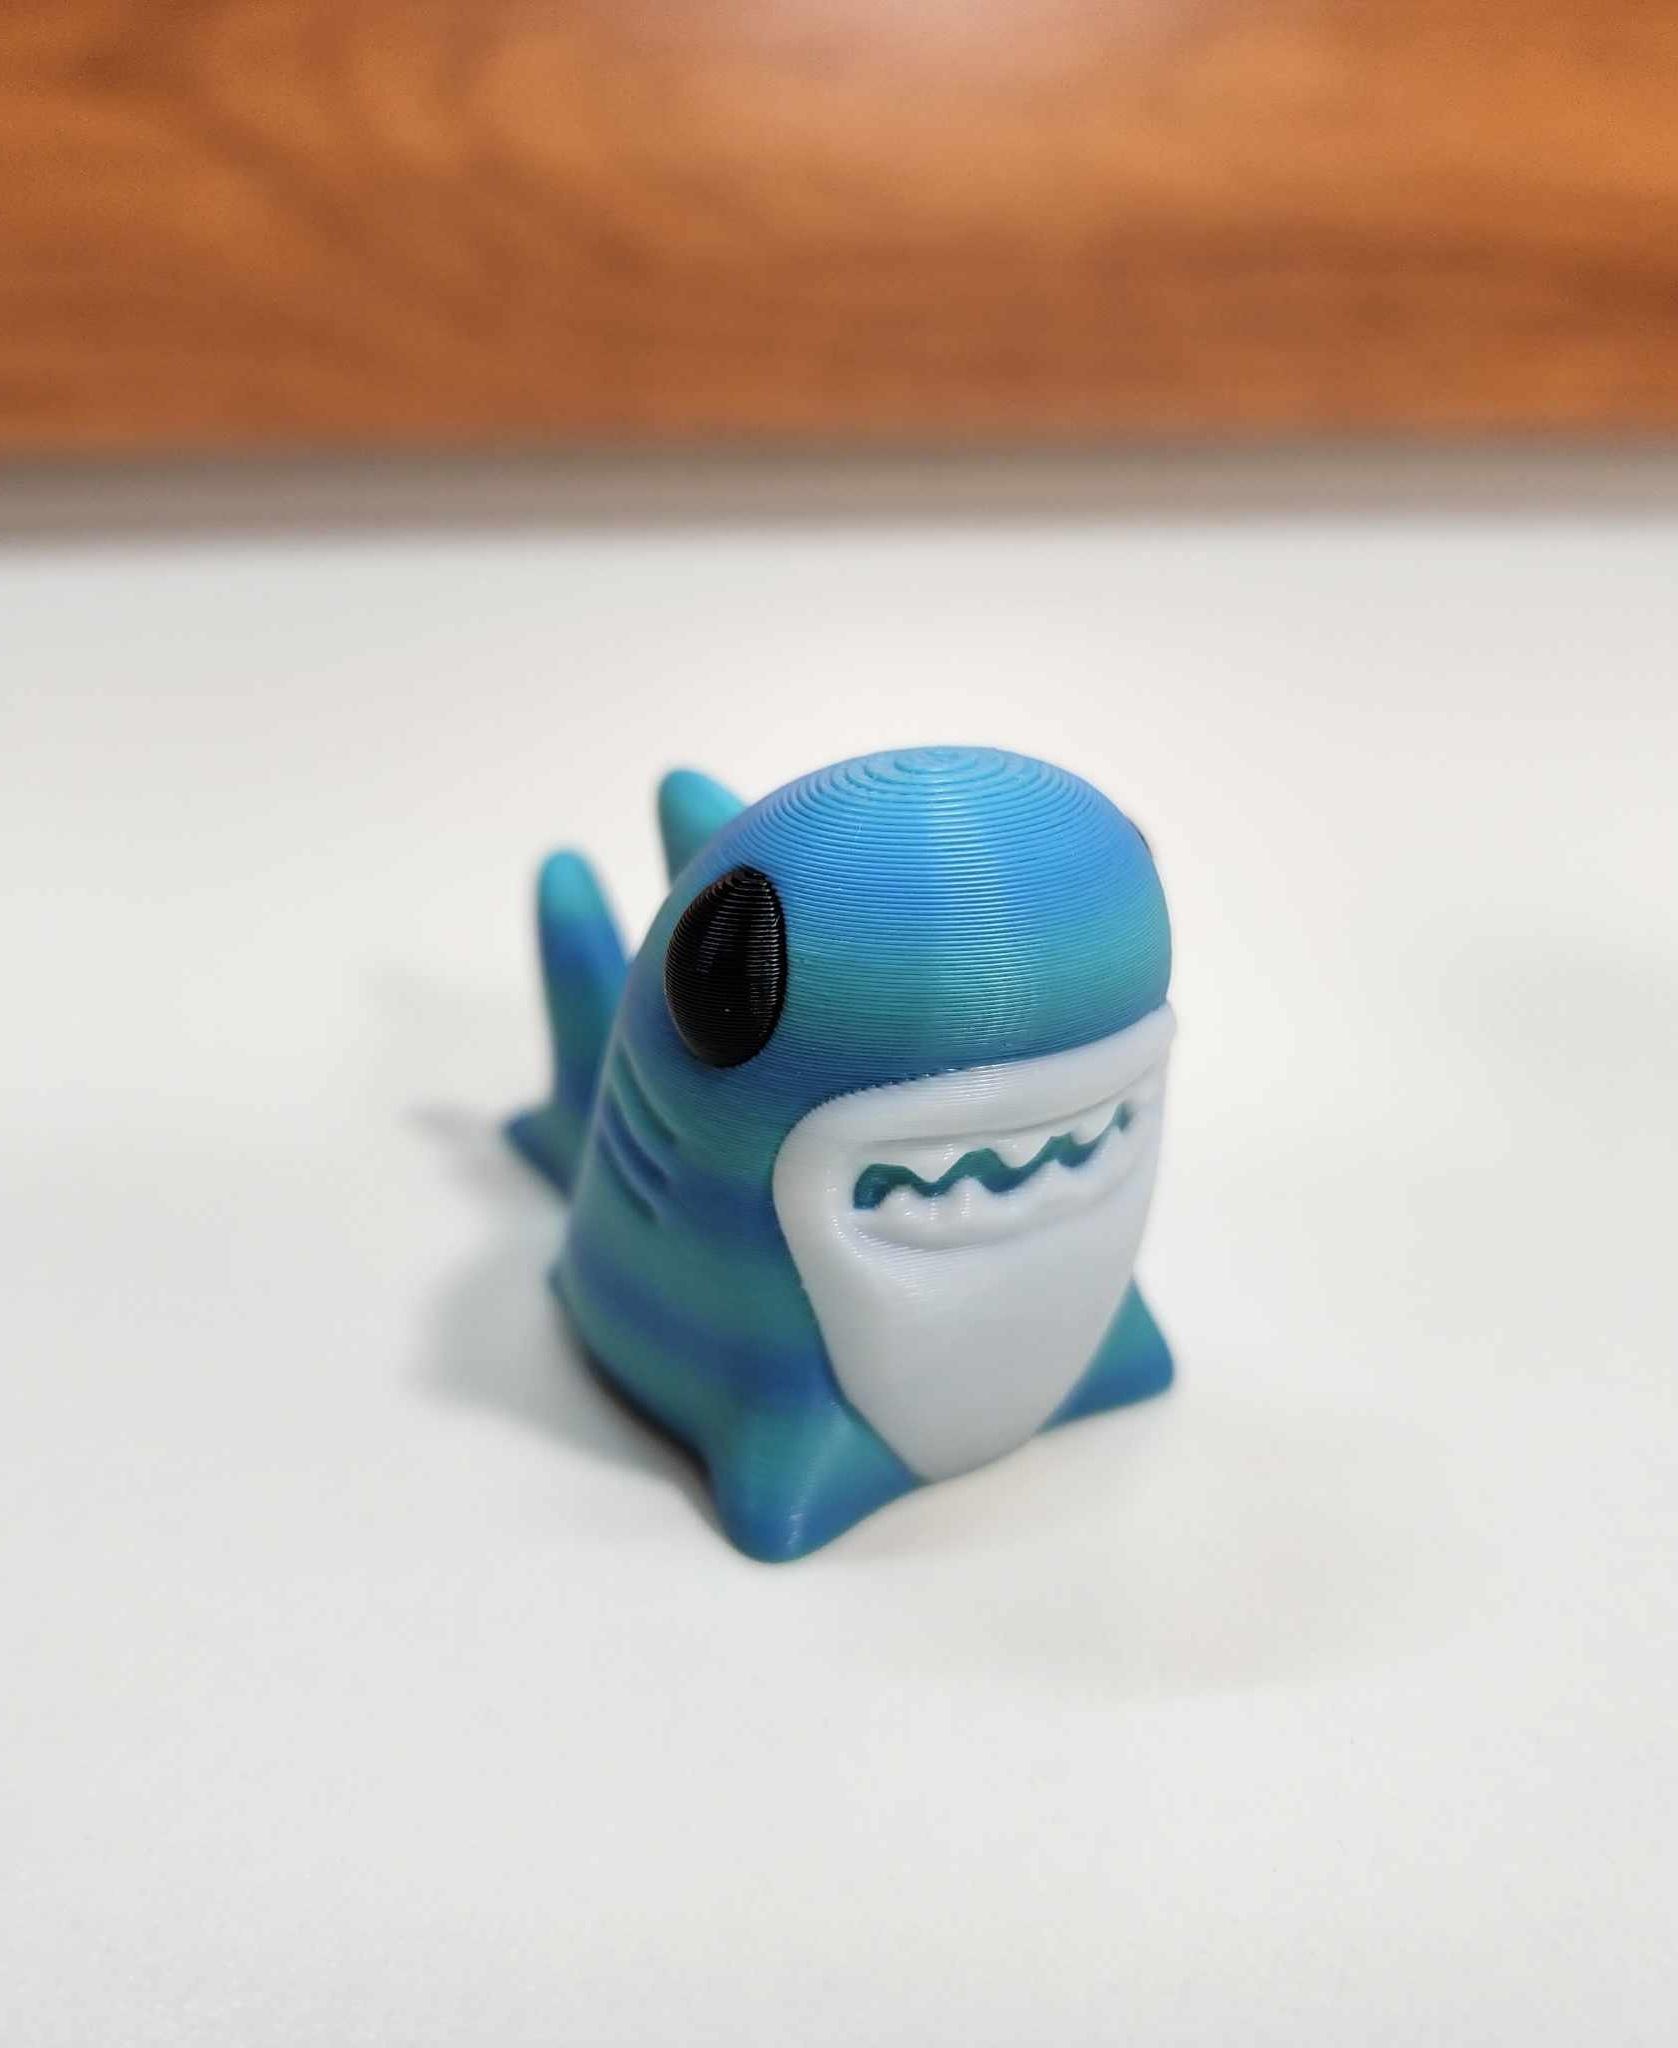 Hello Sharkie - I forgot to paint his mouth but this is a great print!  I used bambu color change gradient filament for the blue. - 3d model